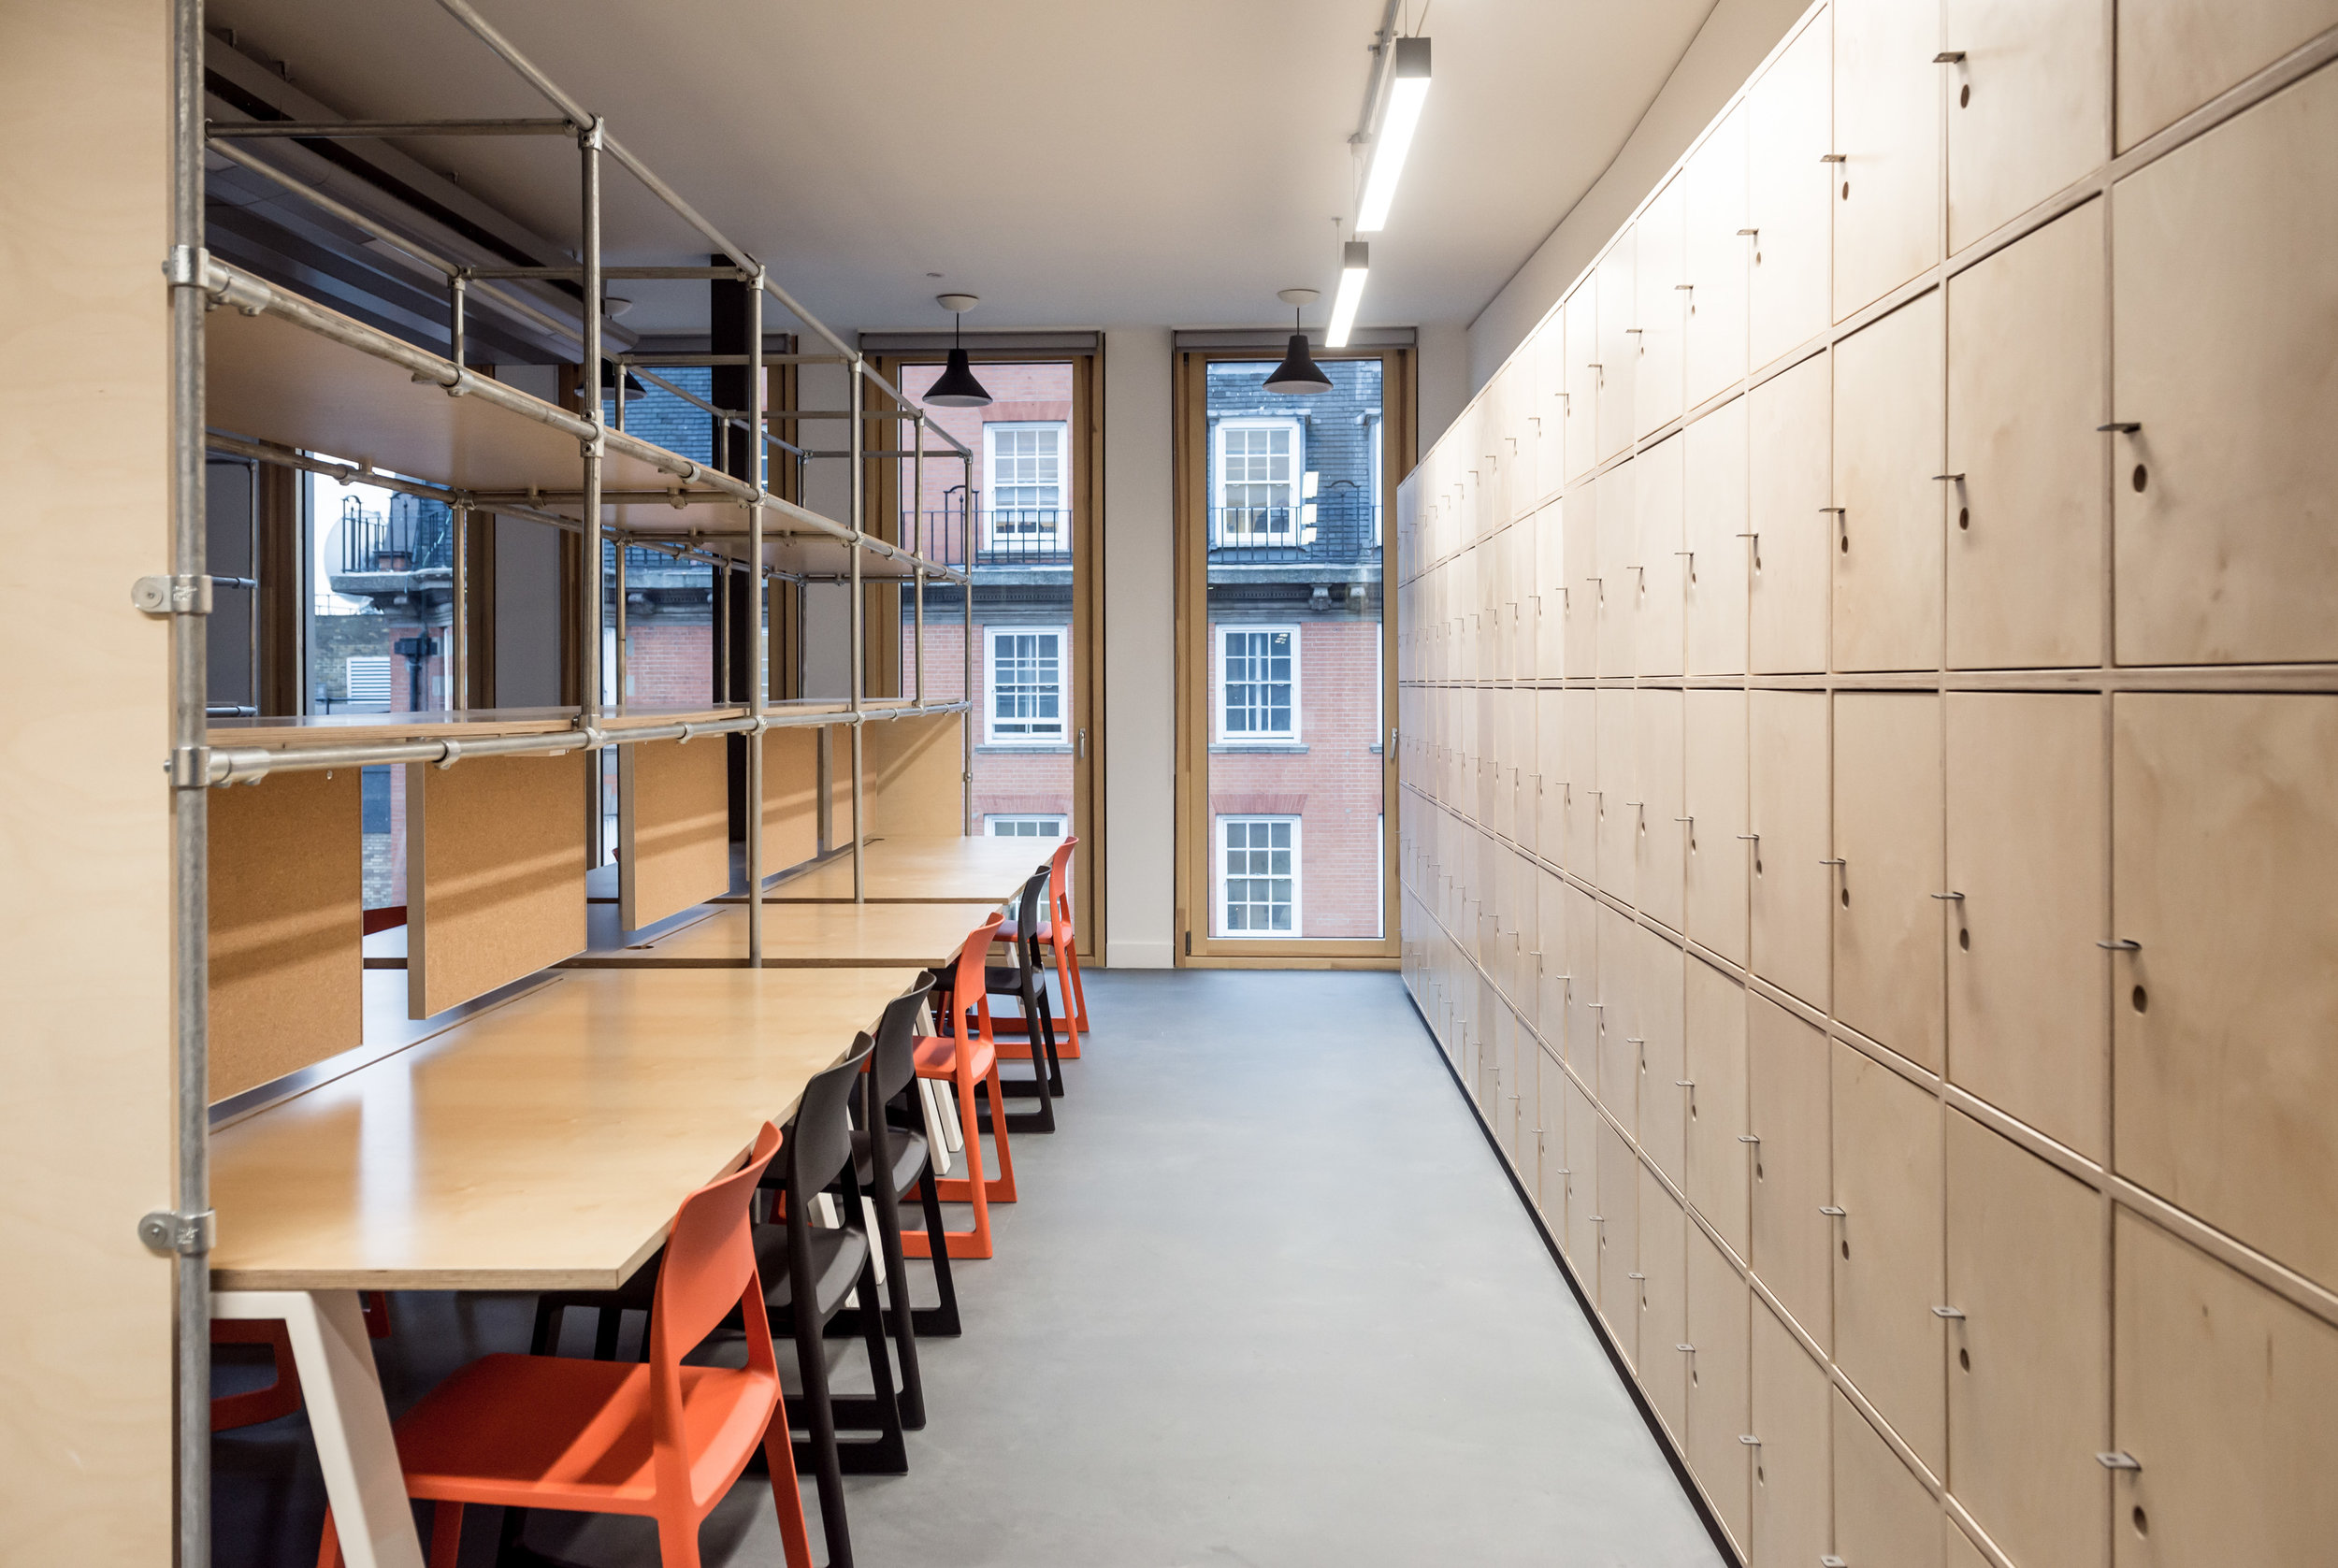  Student work spaces in  the refurbished Bartlett School of Architecture, 22 Gordon Street. London by Hawkins/Brown Architects 